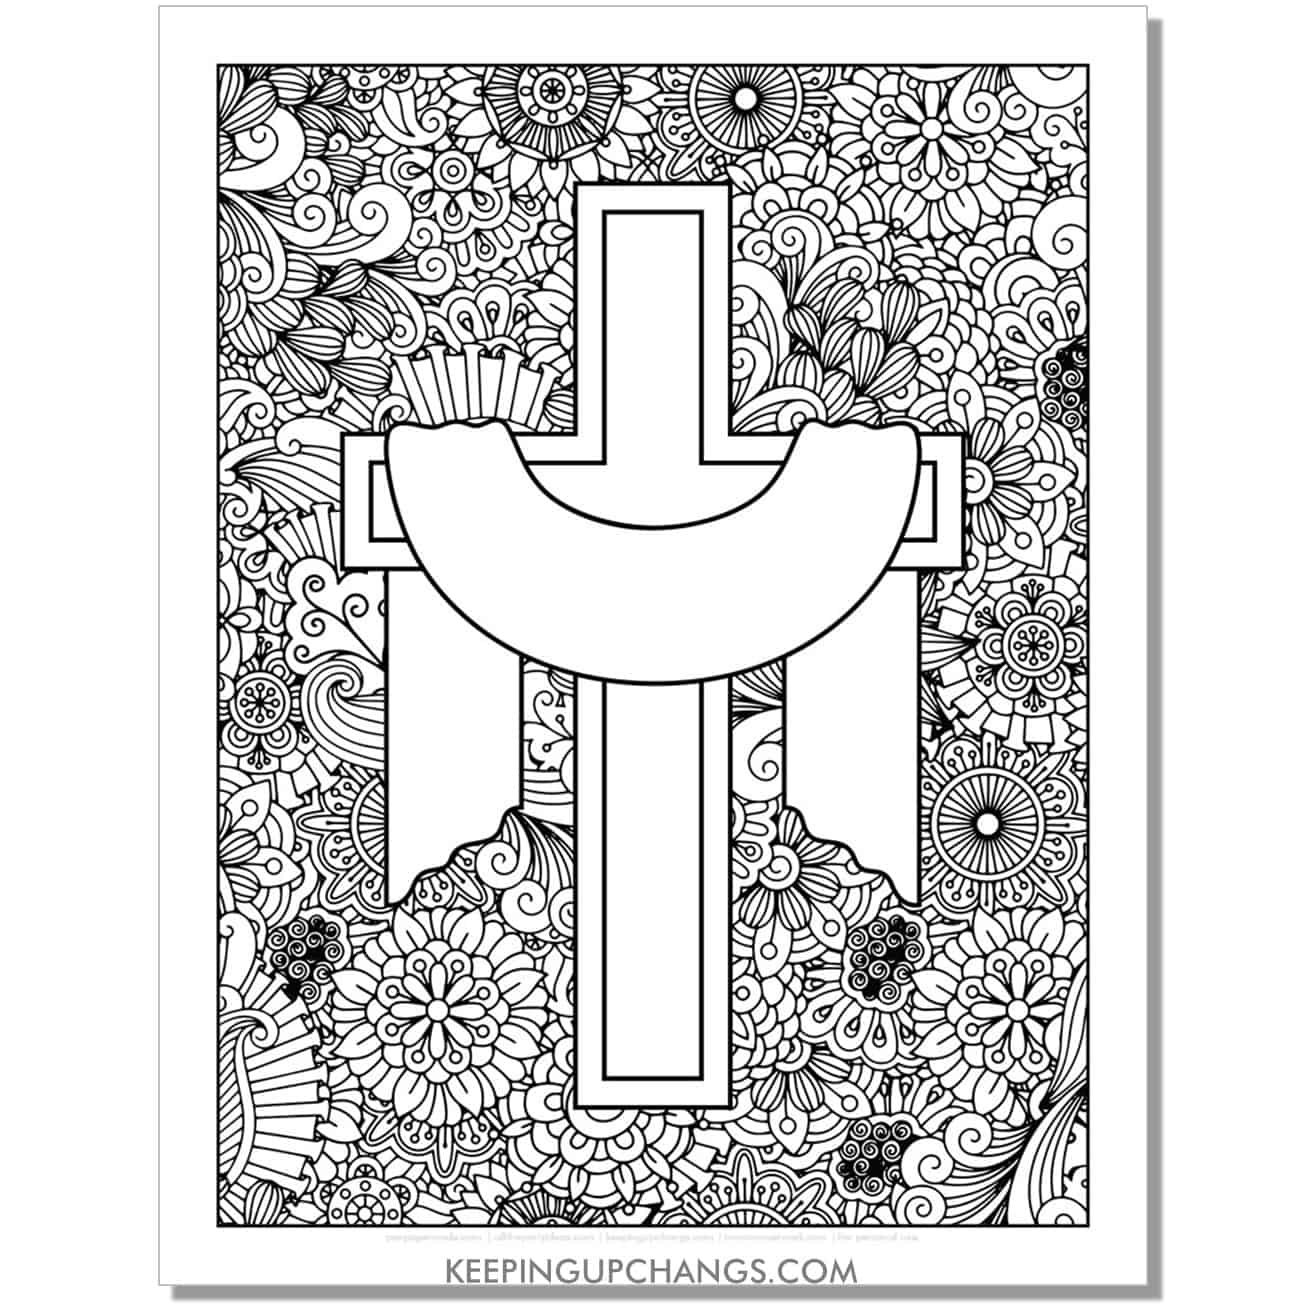 jesus christ resurrection cross on floral mandala background religious easter coloring page, sheet